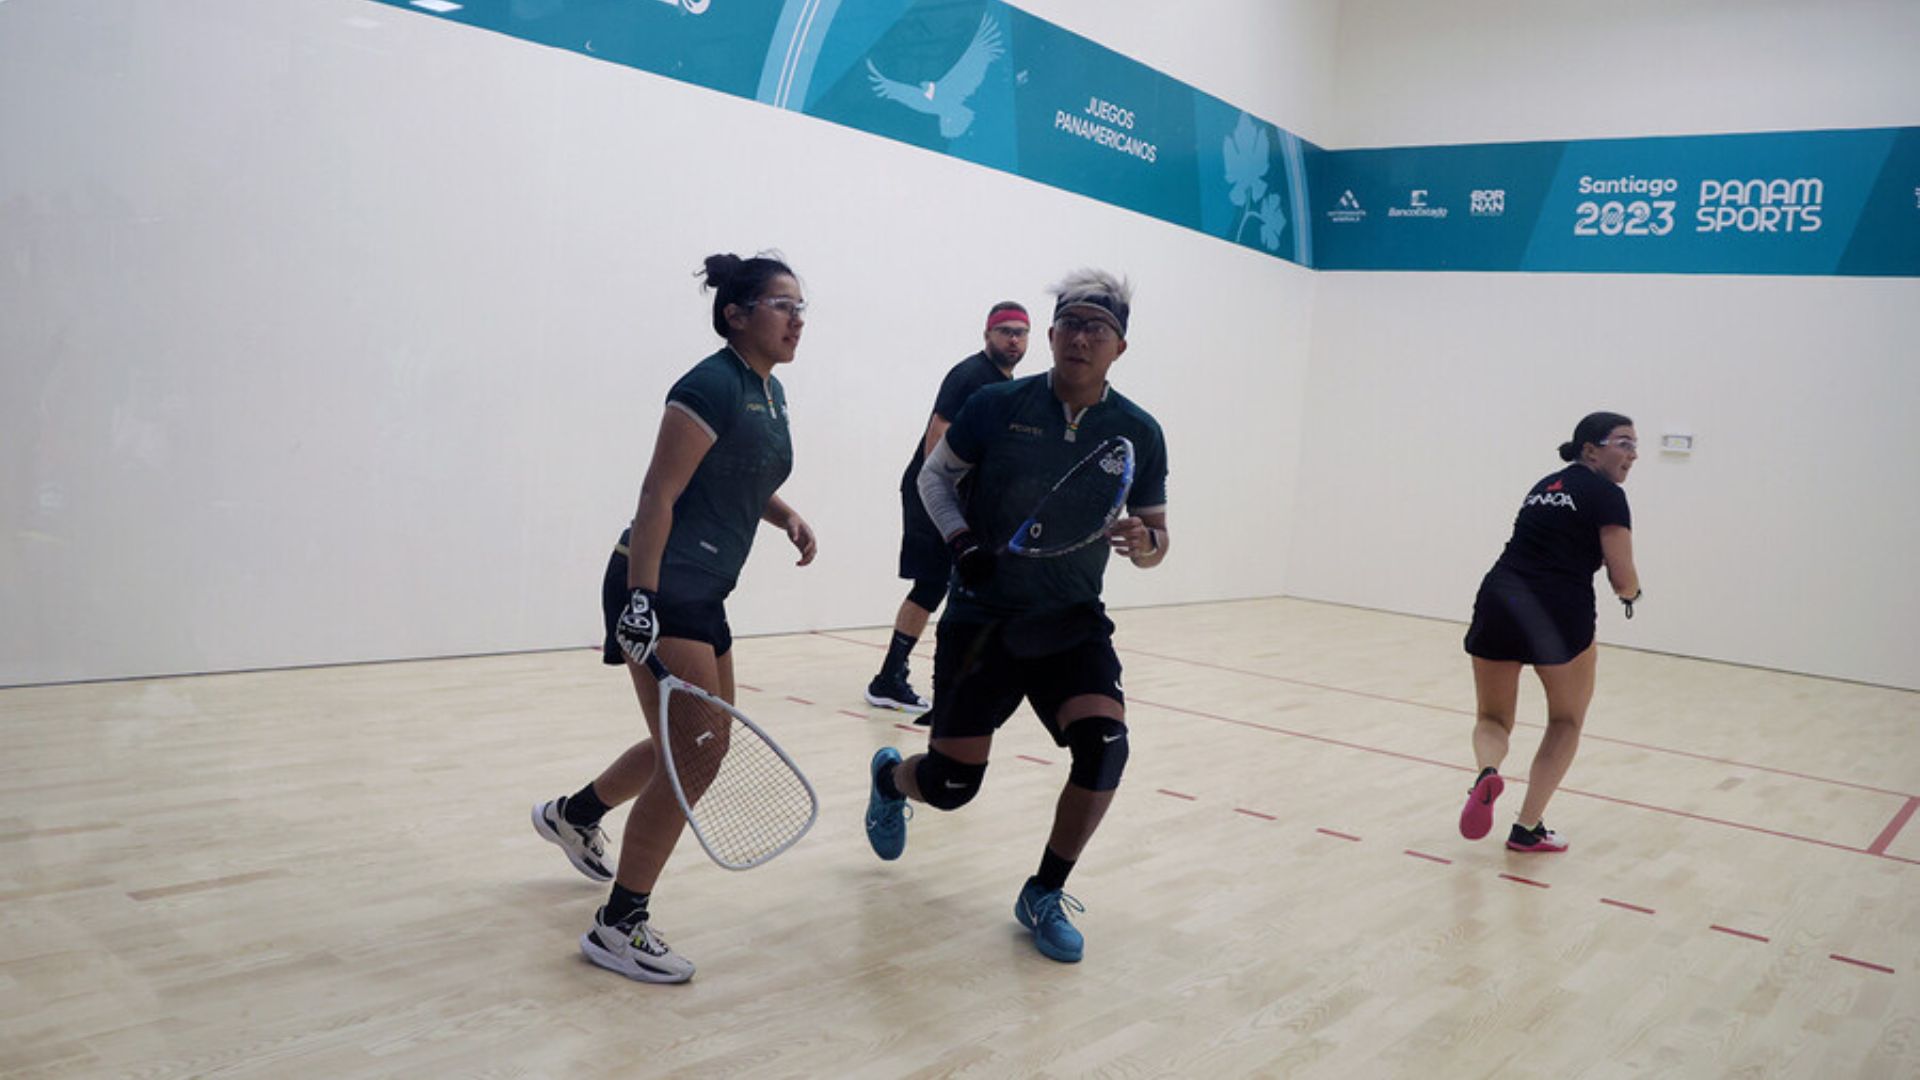 Bolivia secures two new medals in racquetball at Santiago 2023